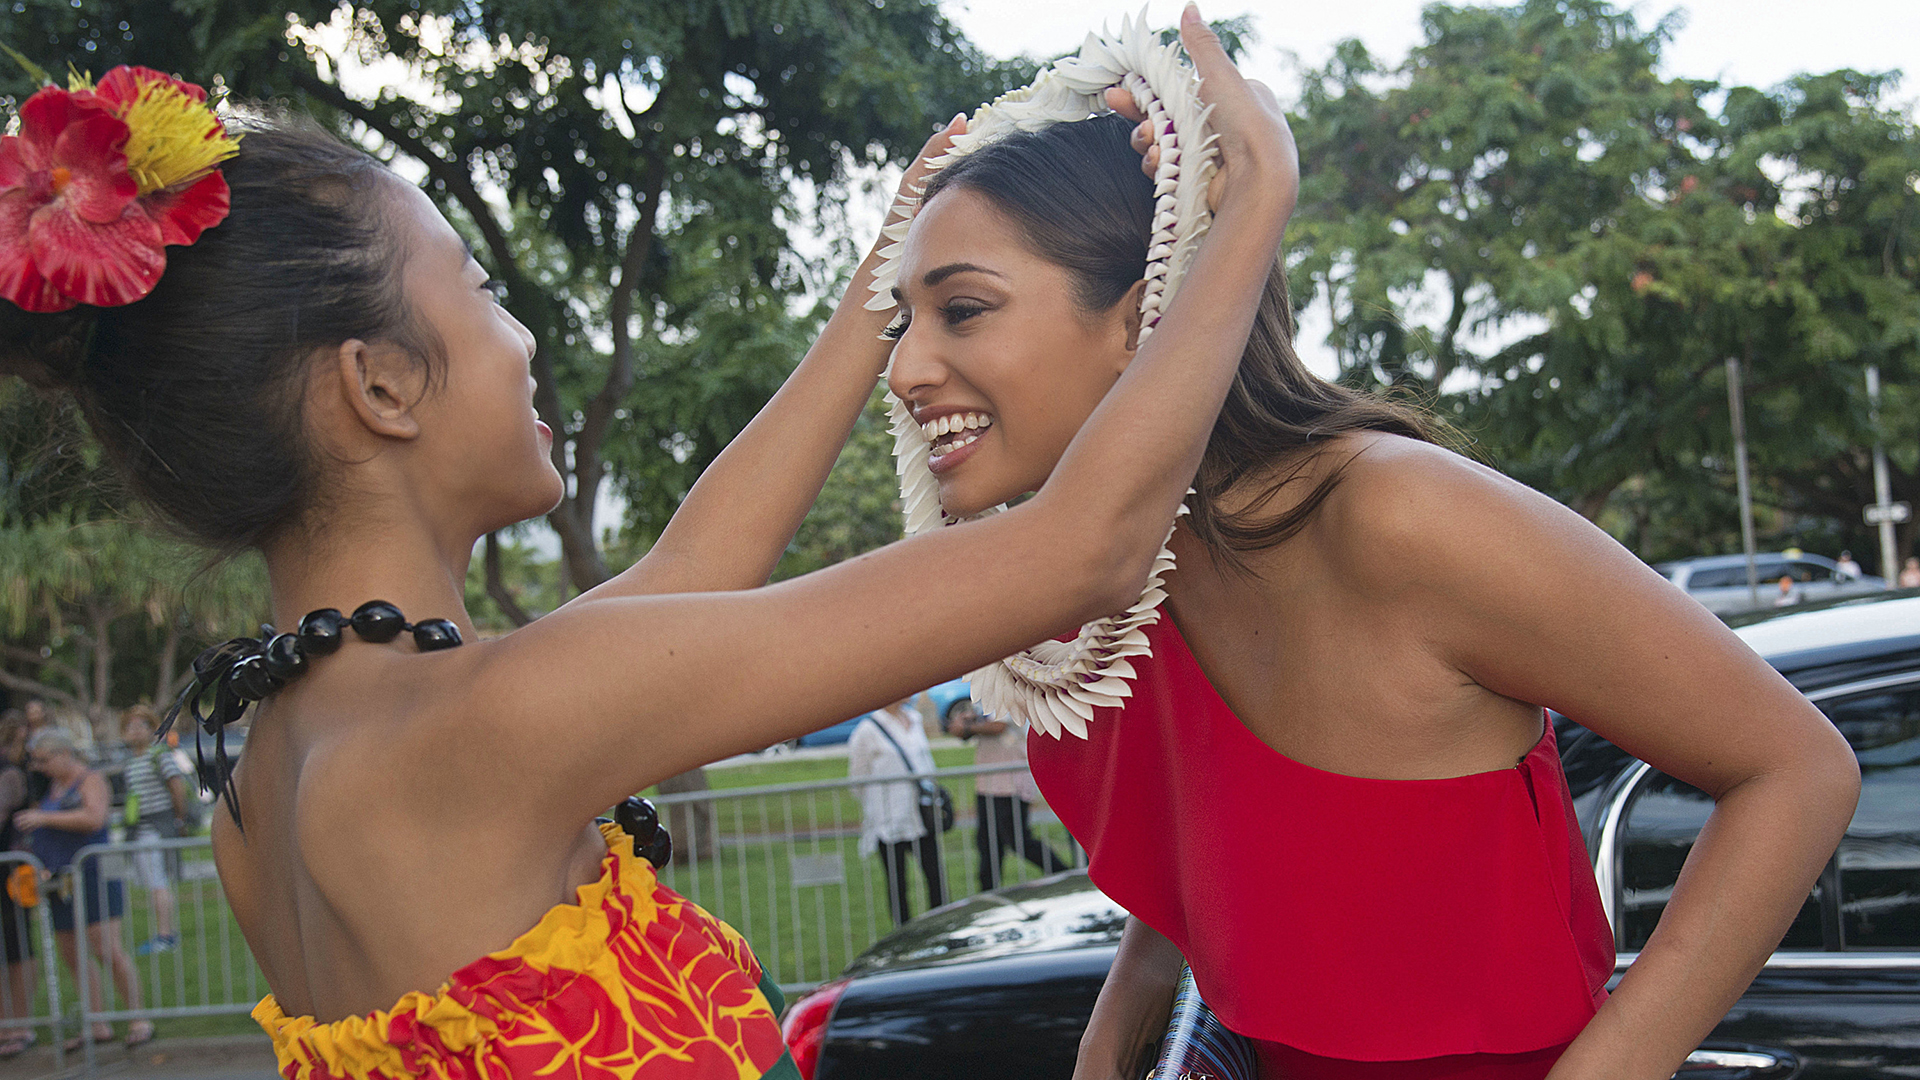 Meaghan Rath receives a lei before entering the celebration.